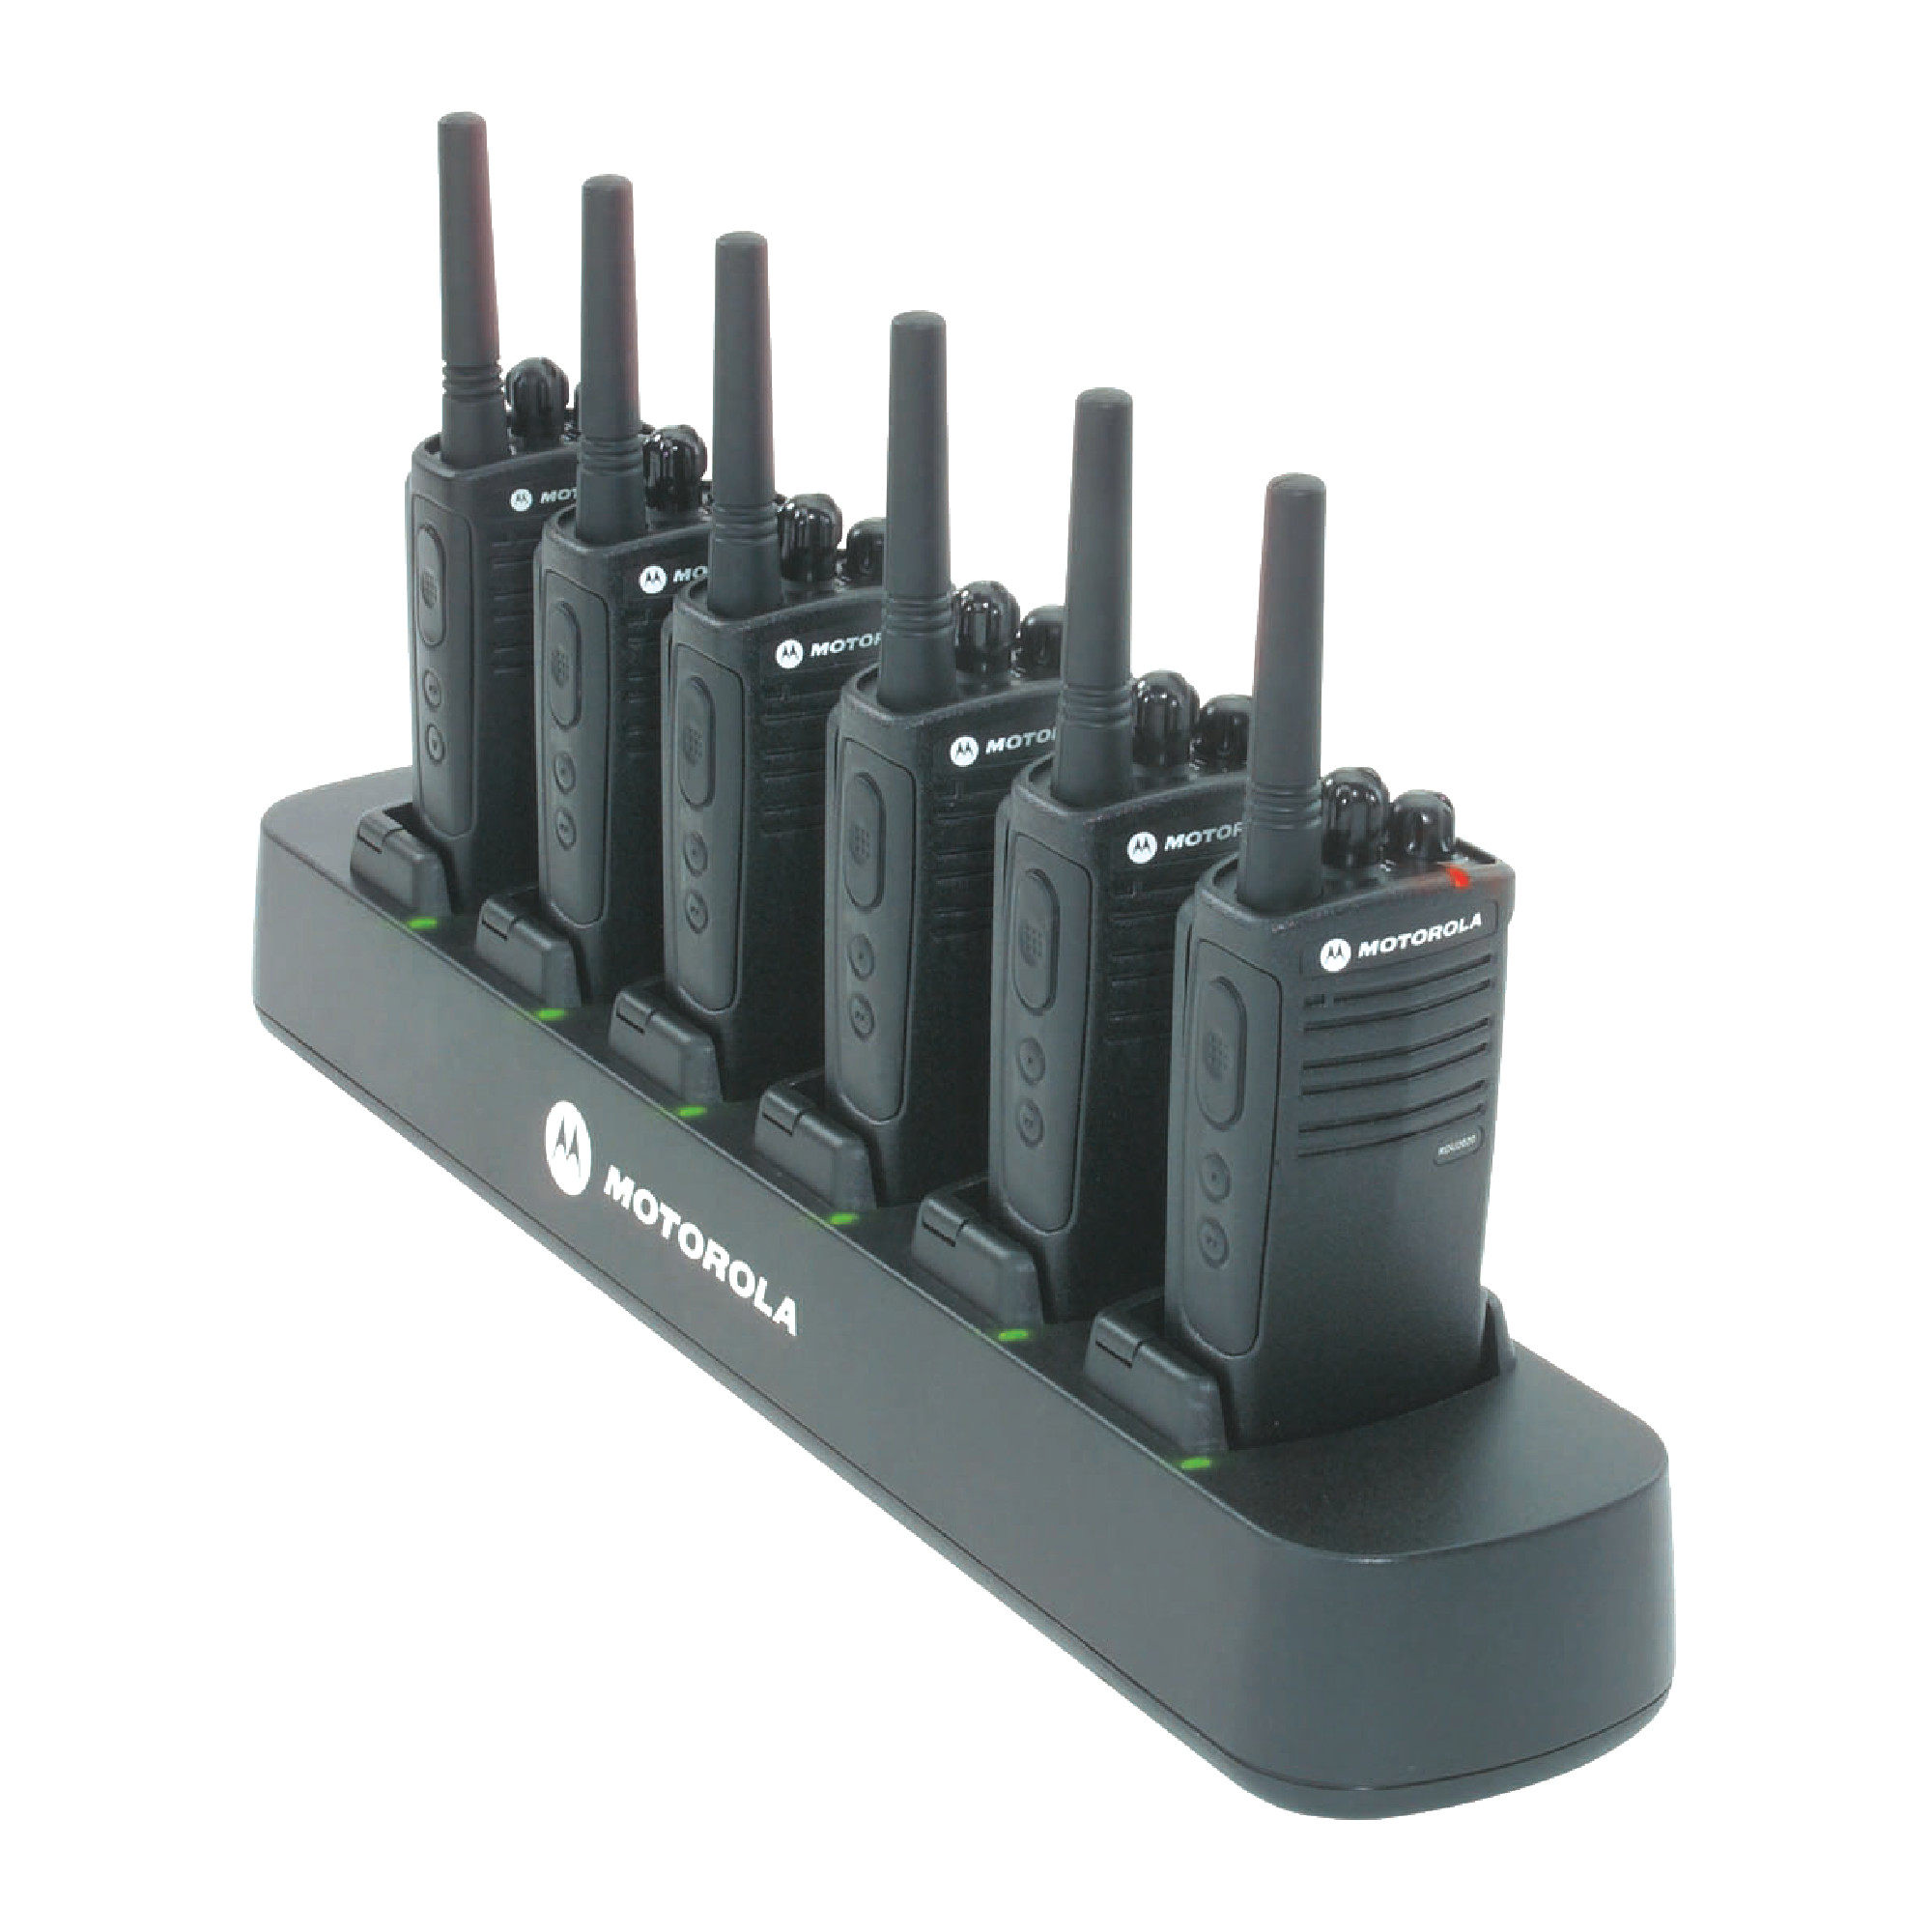 6-Unit Charger With Cloning Capability